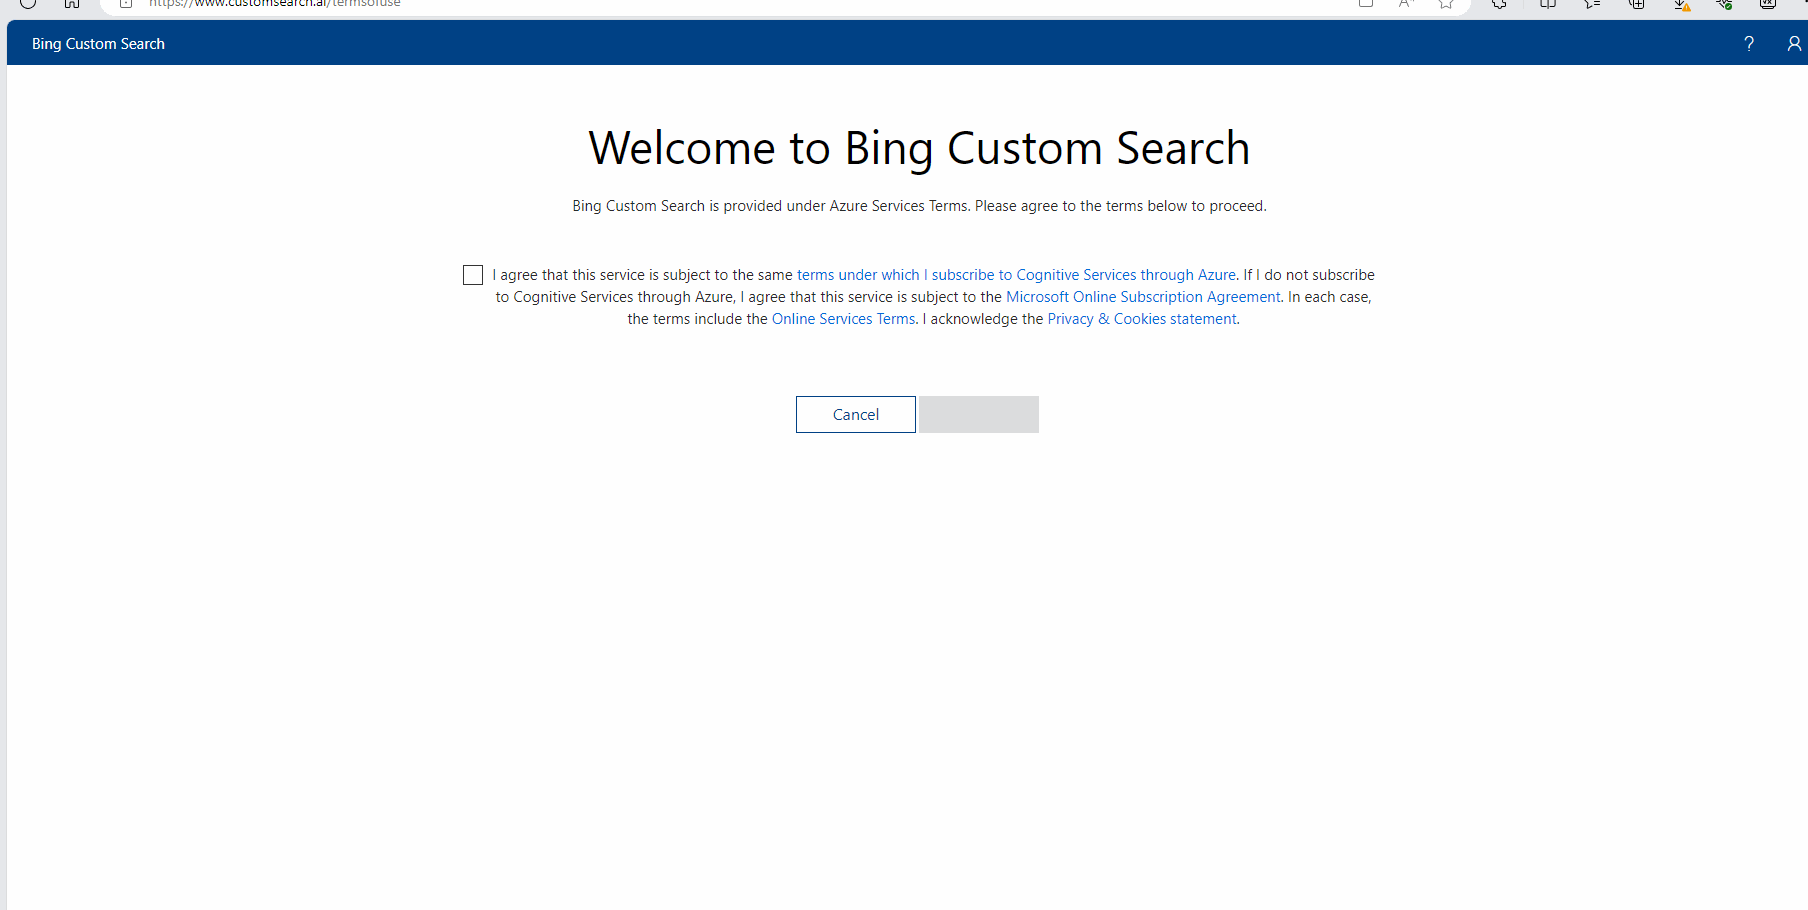 custom_search_Acceptterms